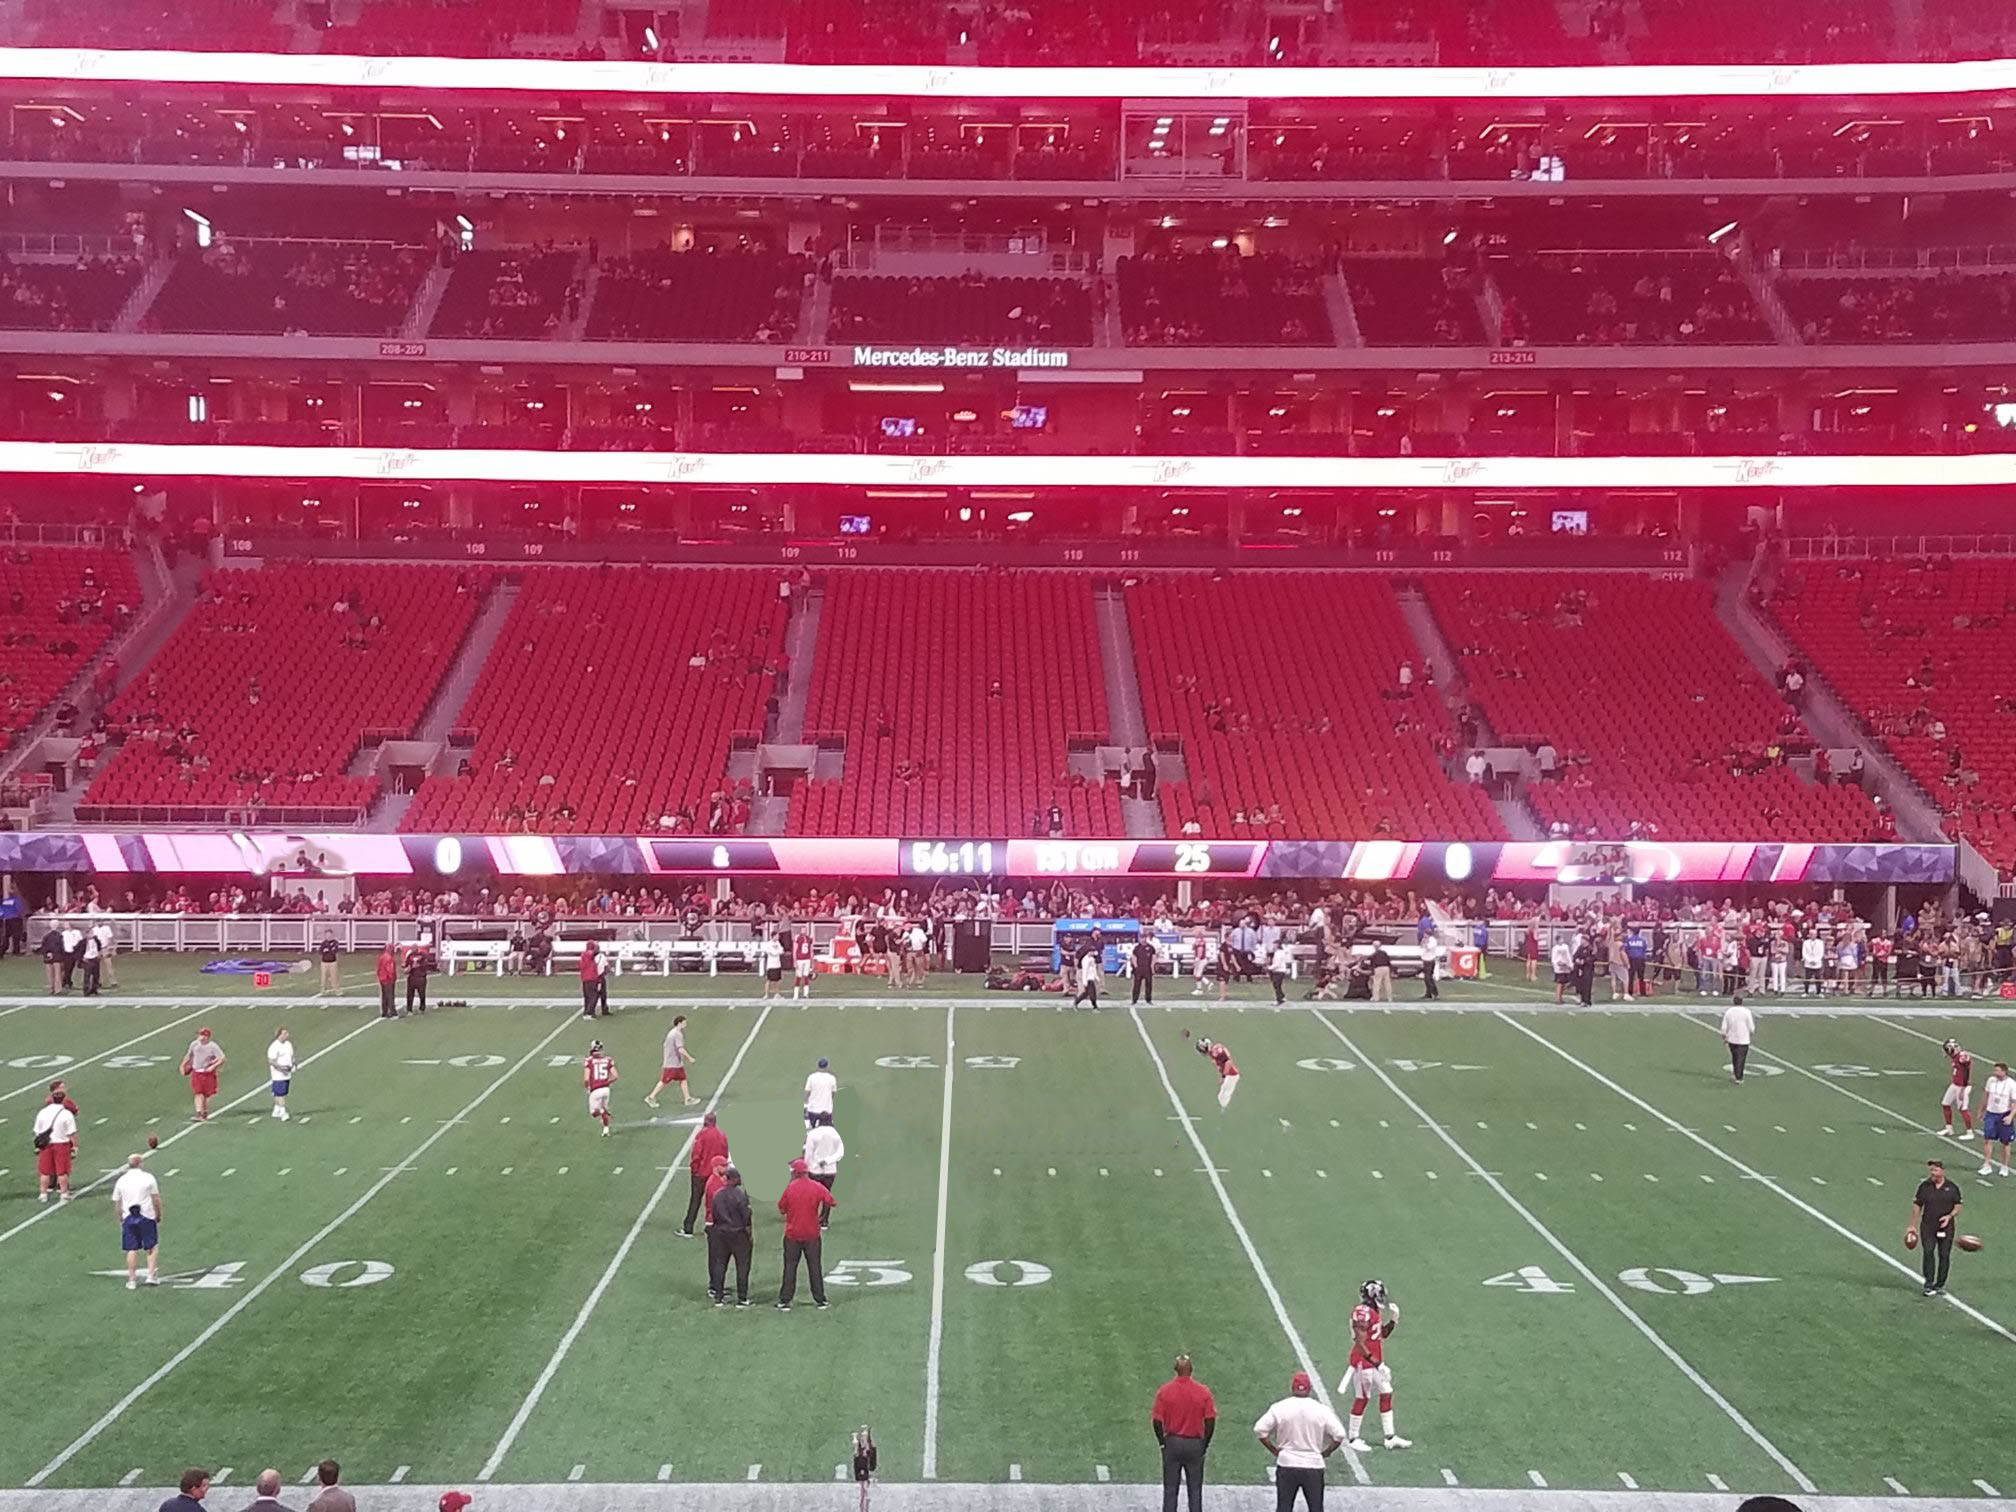 Falcons Dome Seating Chart